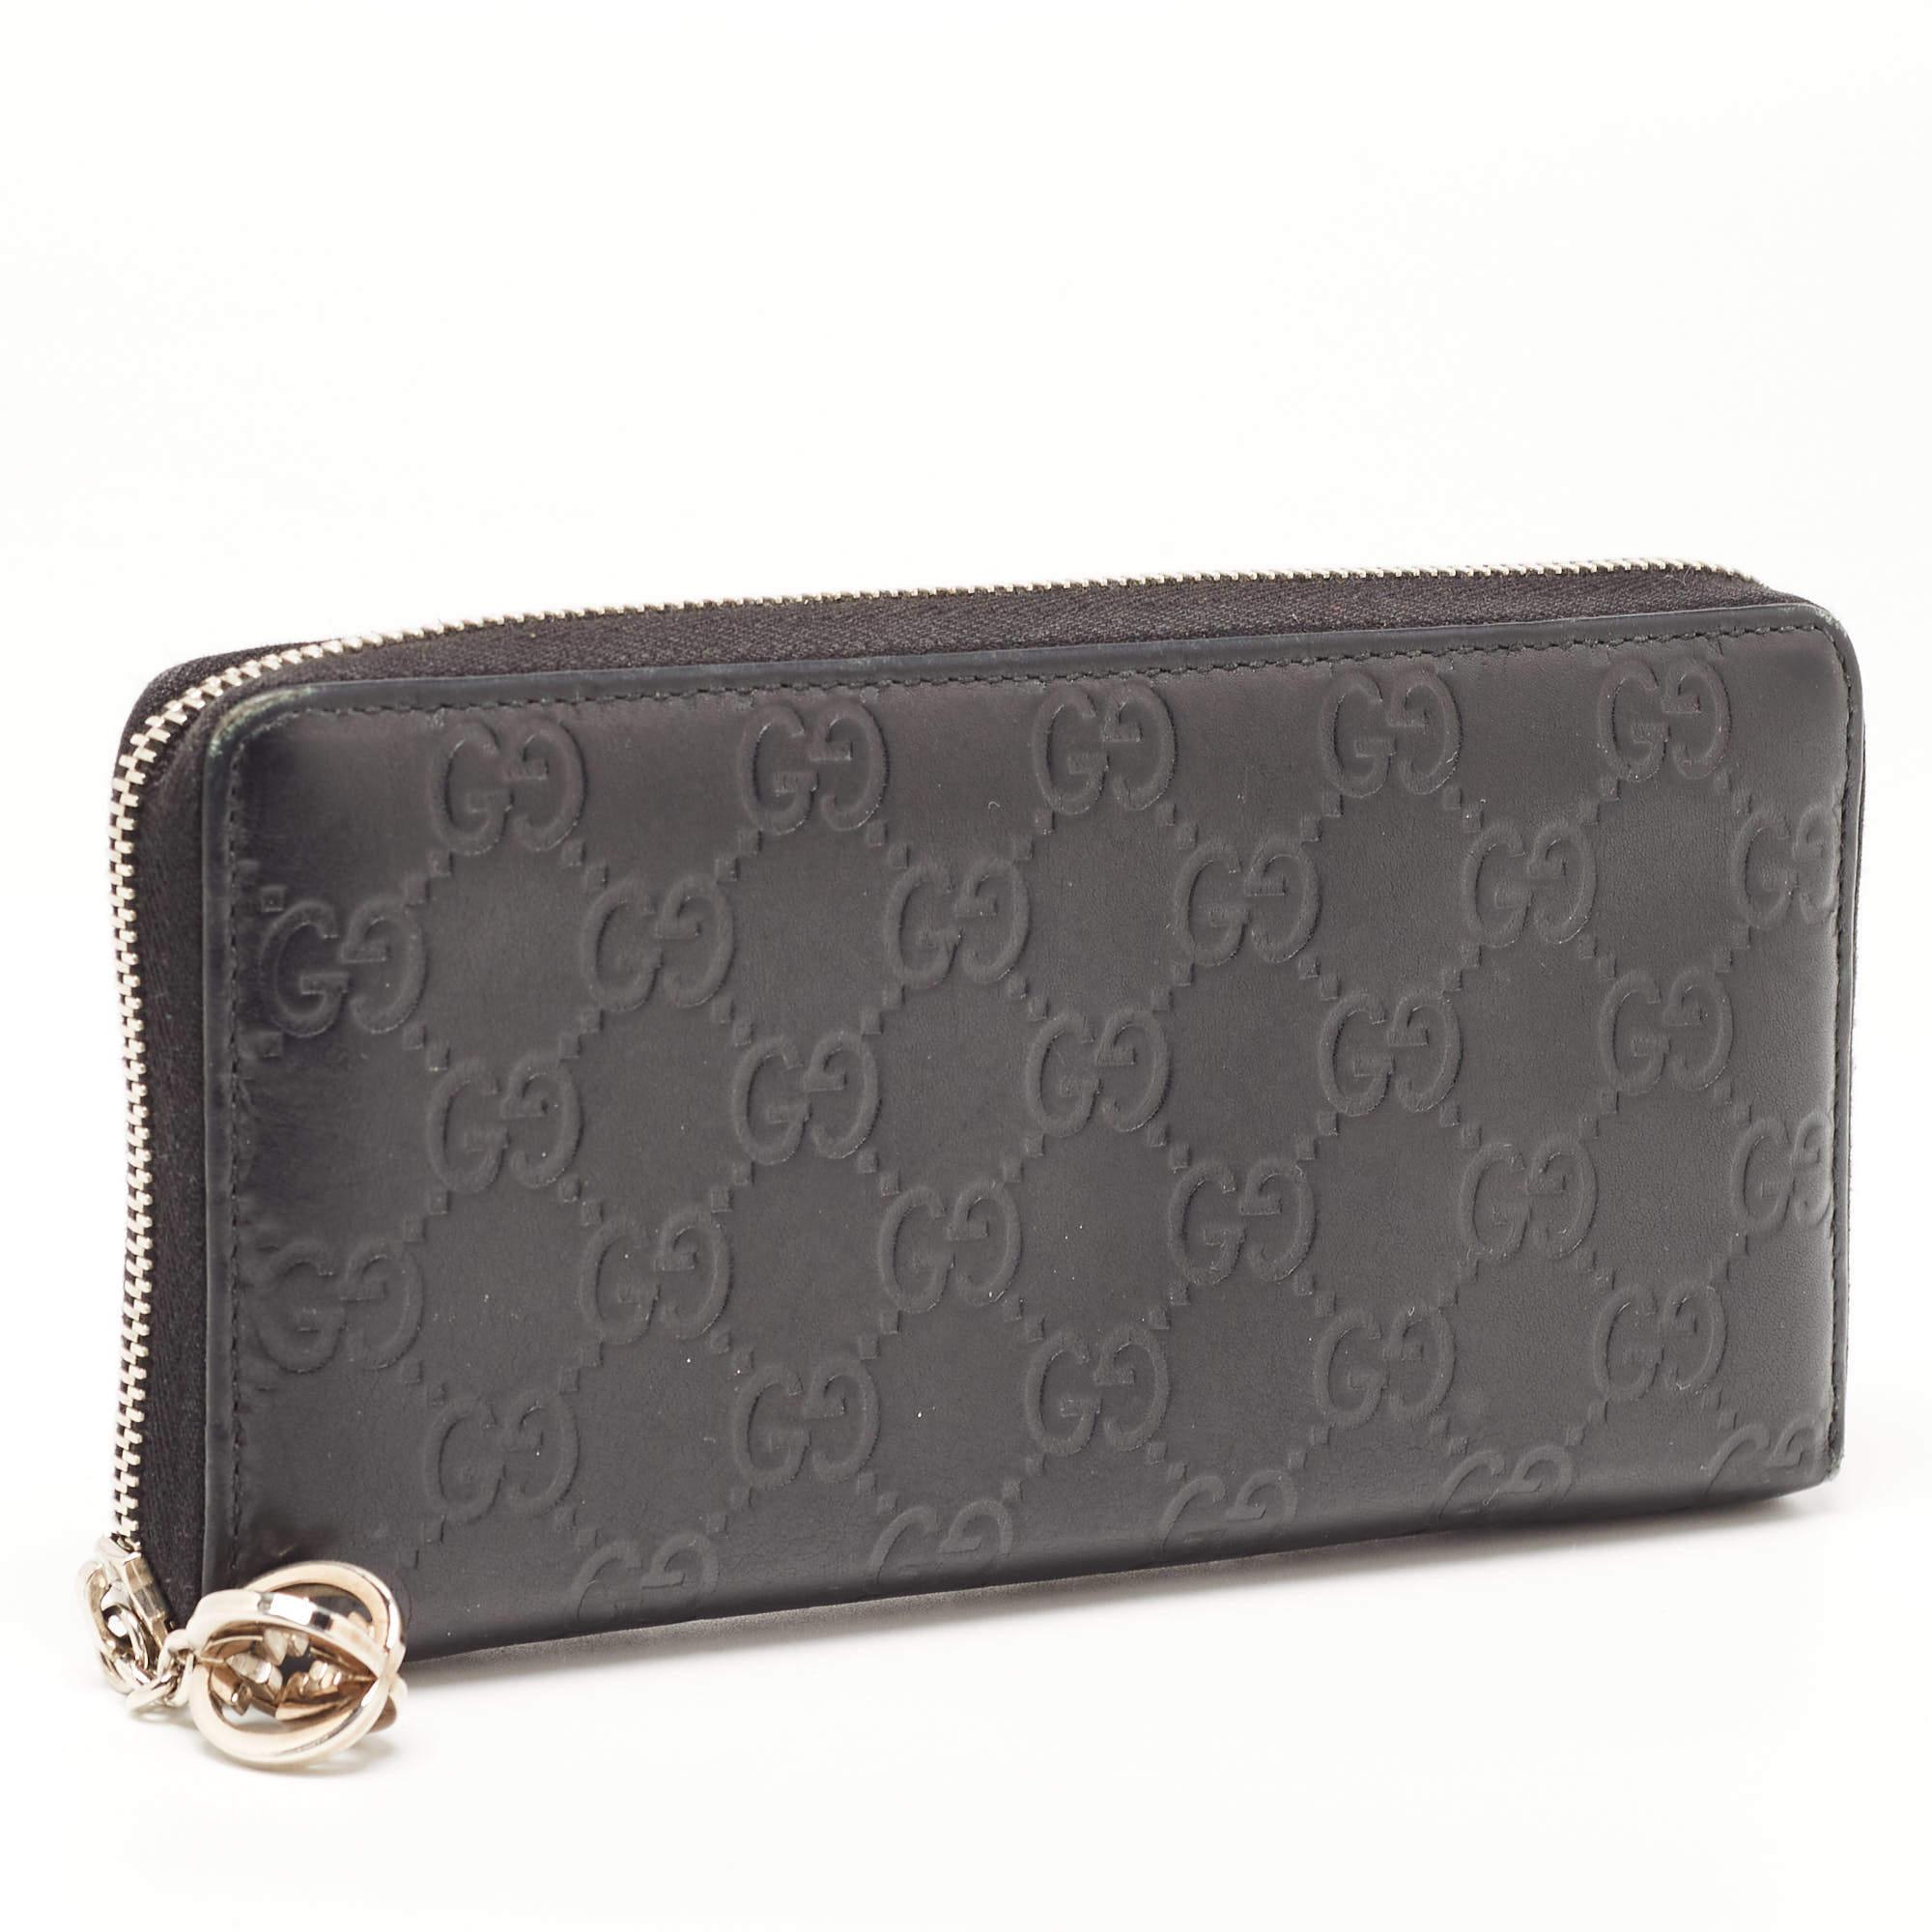 Black Gucci Back Guccissima Leather Zip Around Wallet